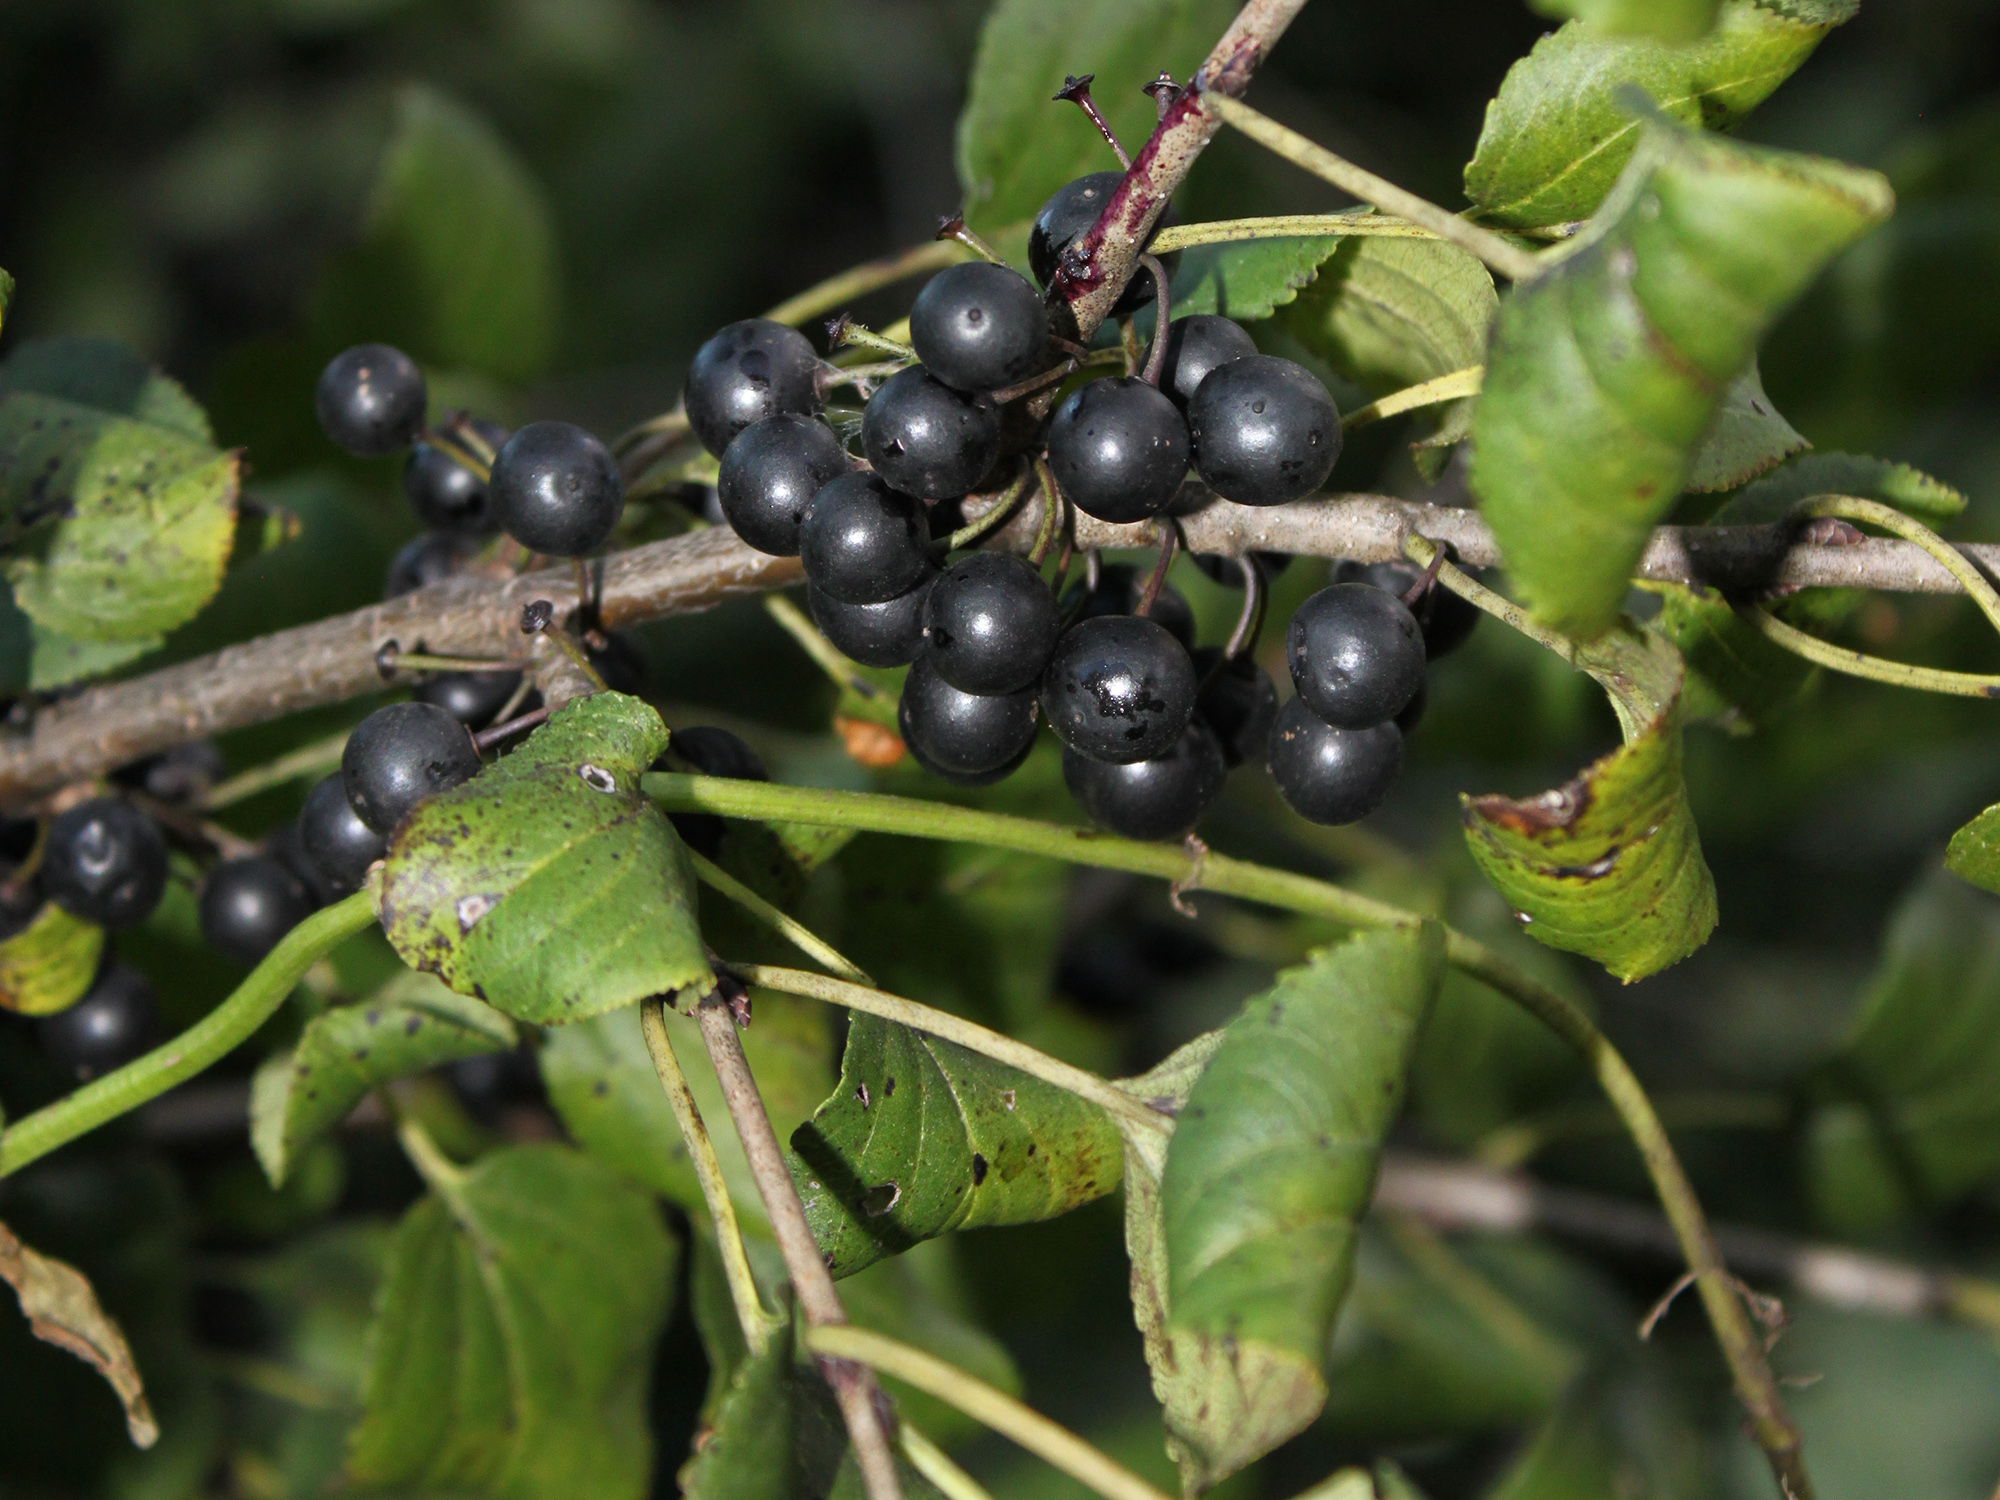 Blue buckthorn berries and glossy green leaves